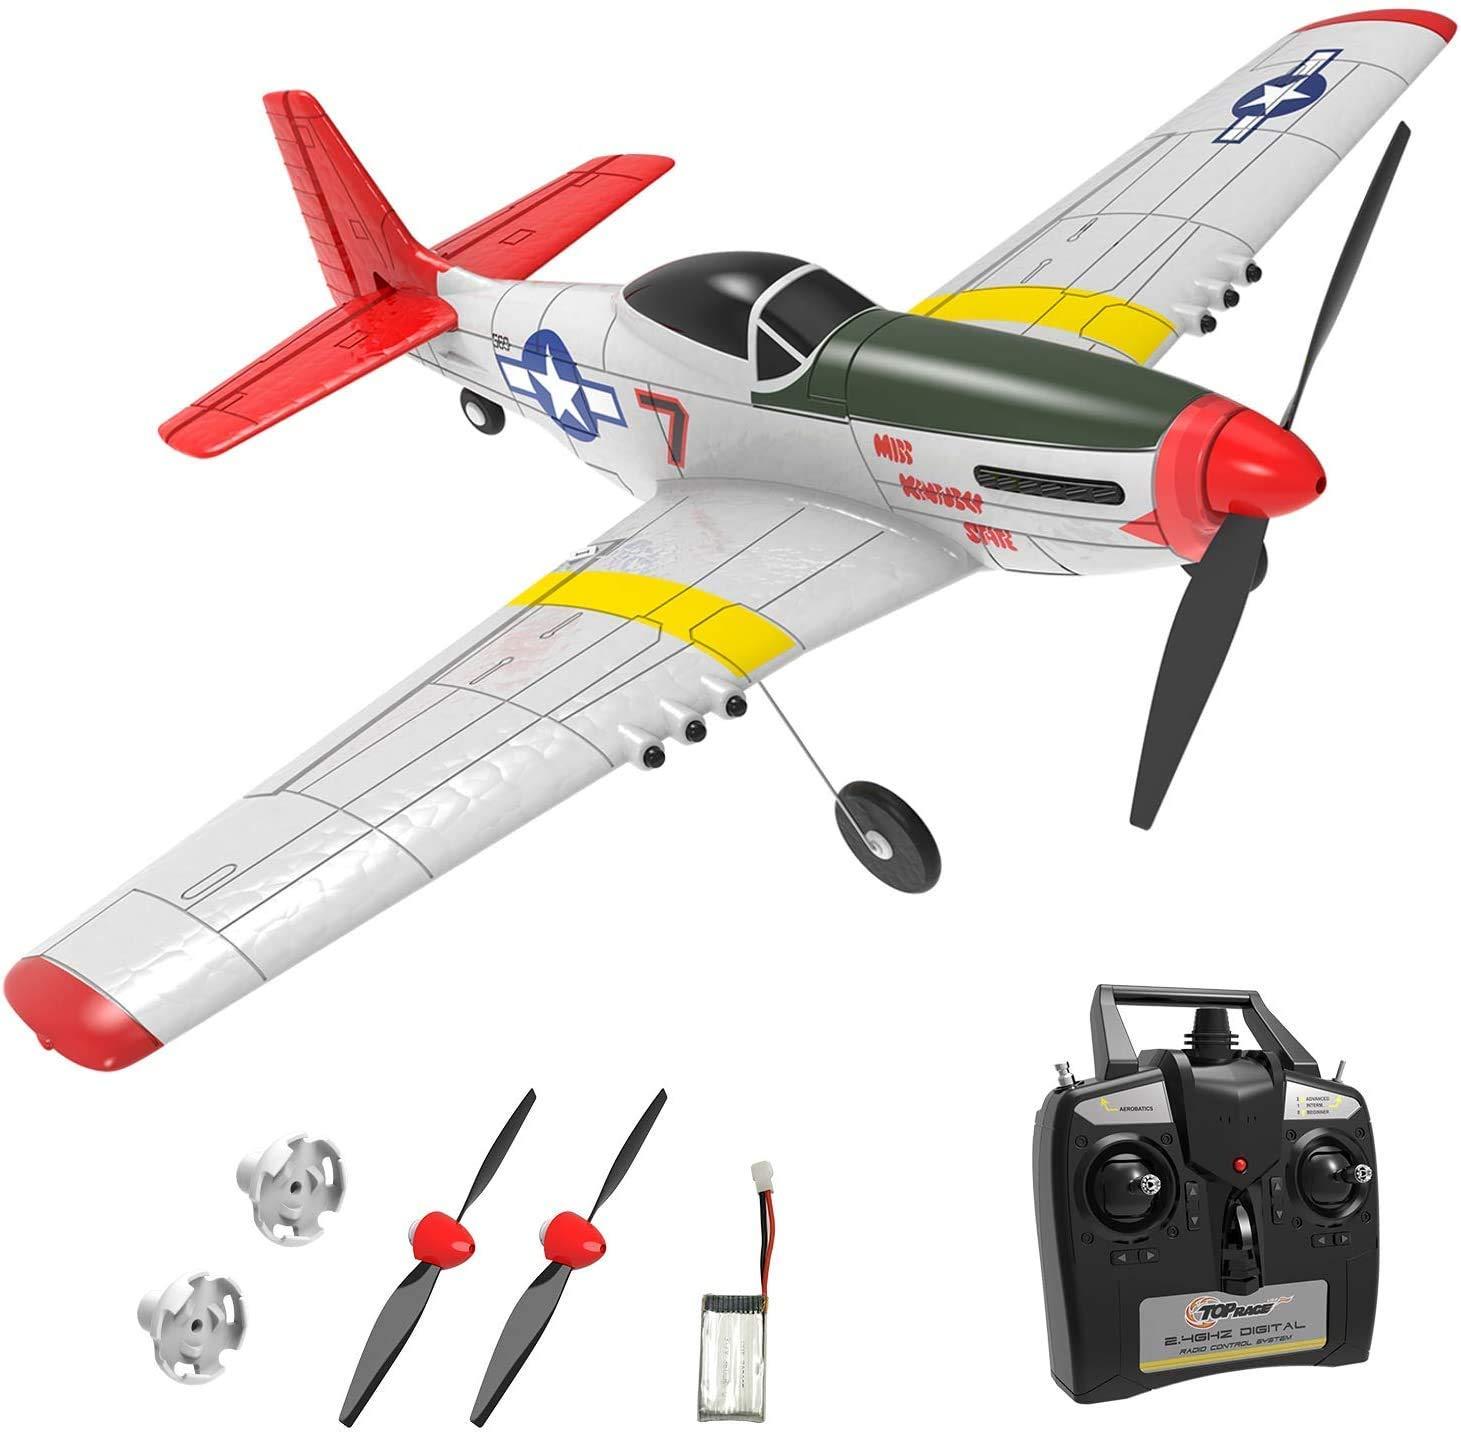 The Rc Plane: Top RC Plane Brands